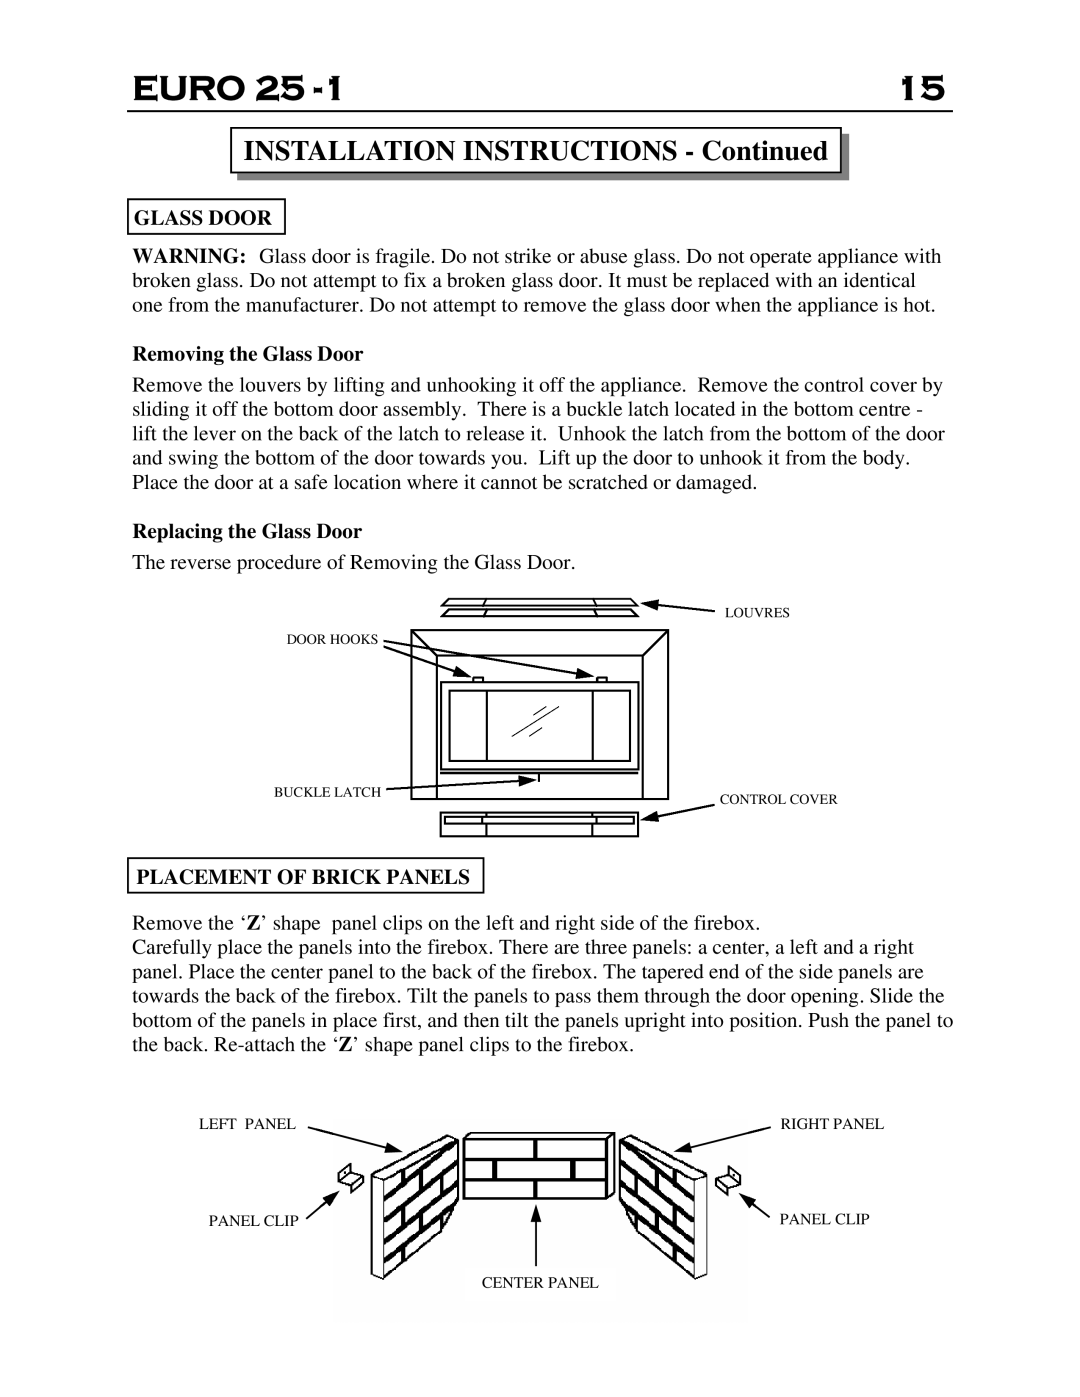 Delkin Devices EI - 25-1 manual Euro, INSTALLATION INSTRUCTIONS - Continued, Removing the Glass Door 